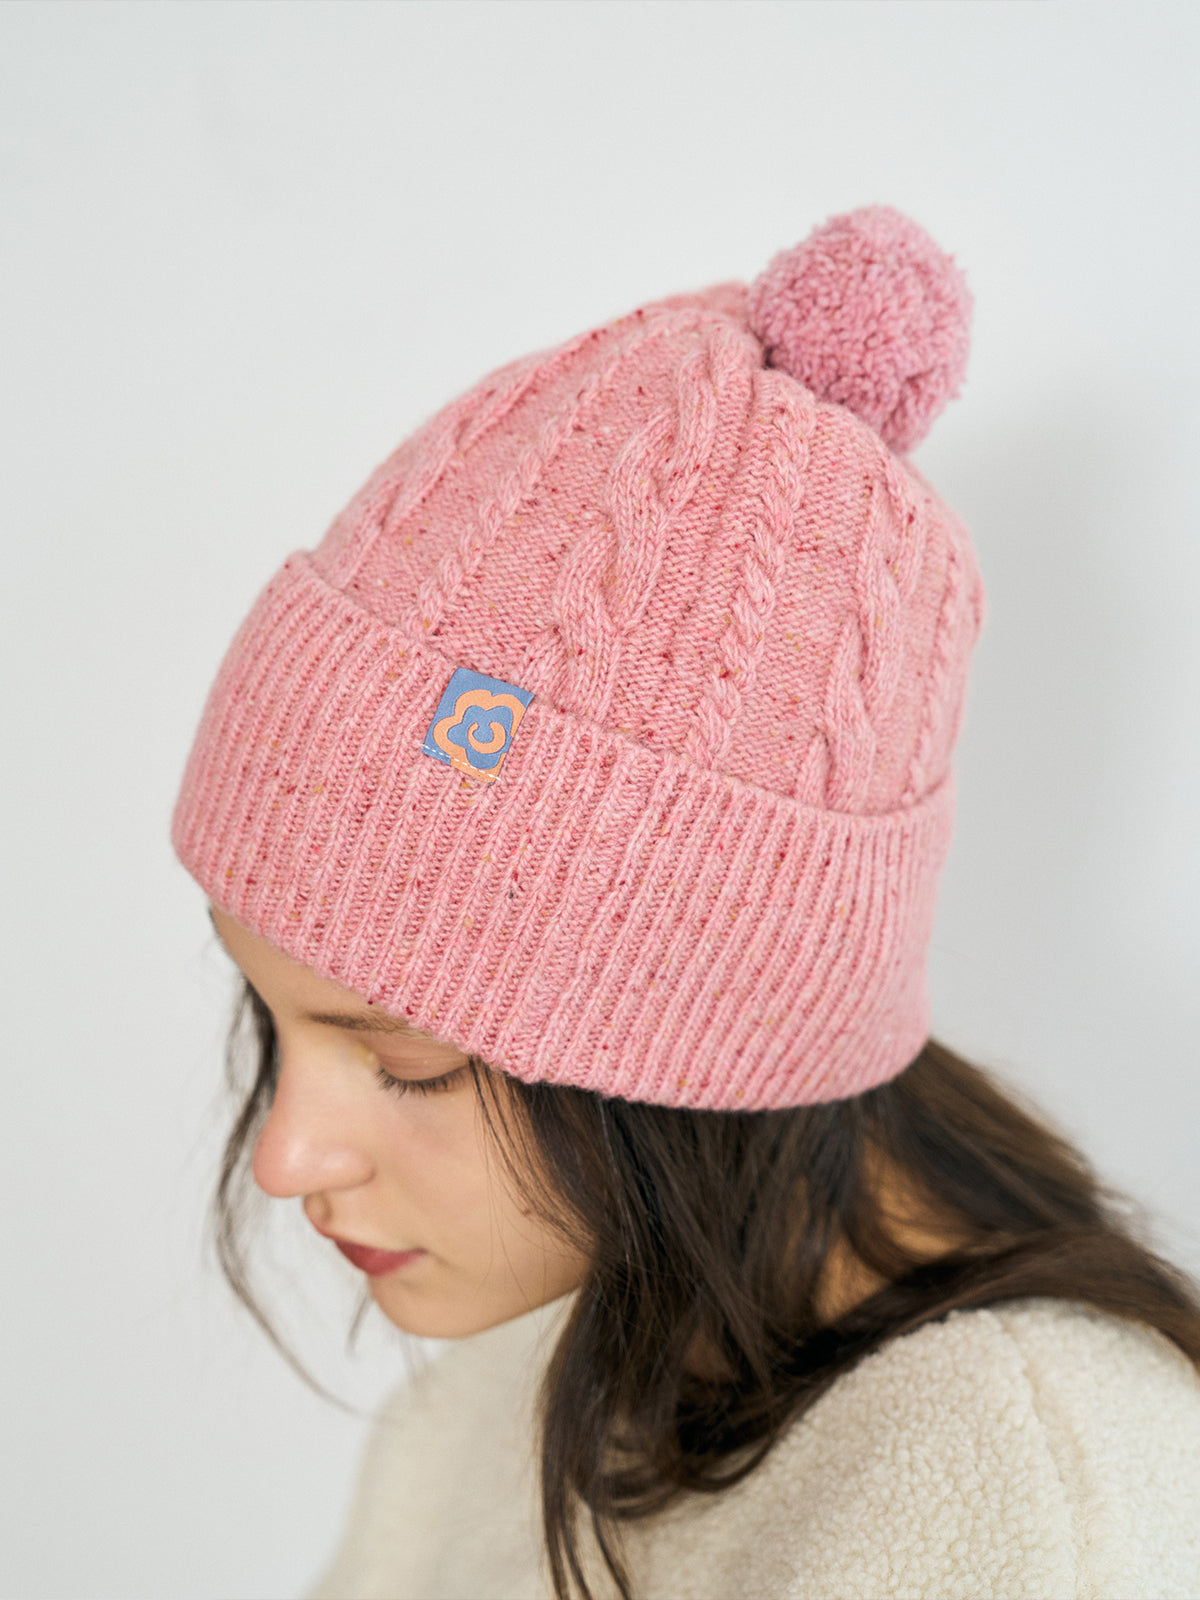 "Pom Pom" Cable Knit Wool Beanie Hat - Pink Blush